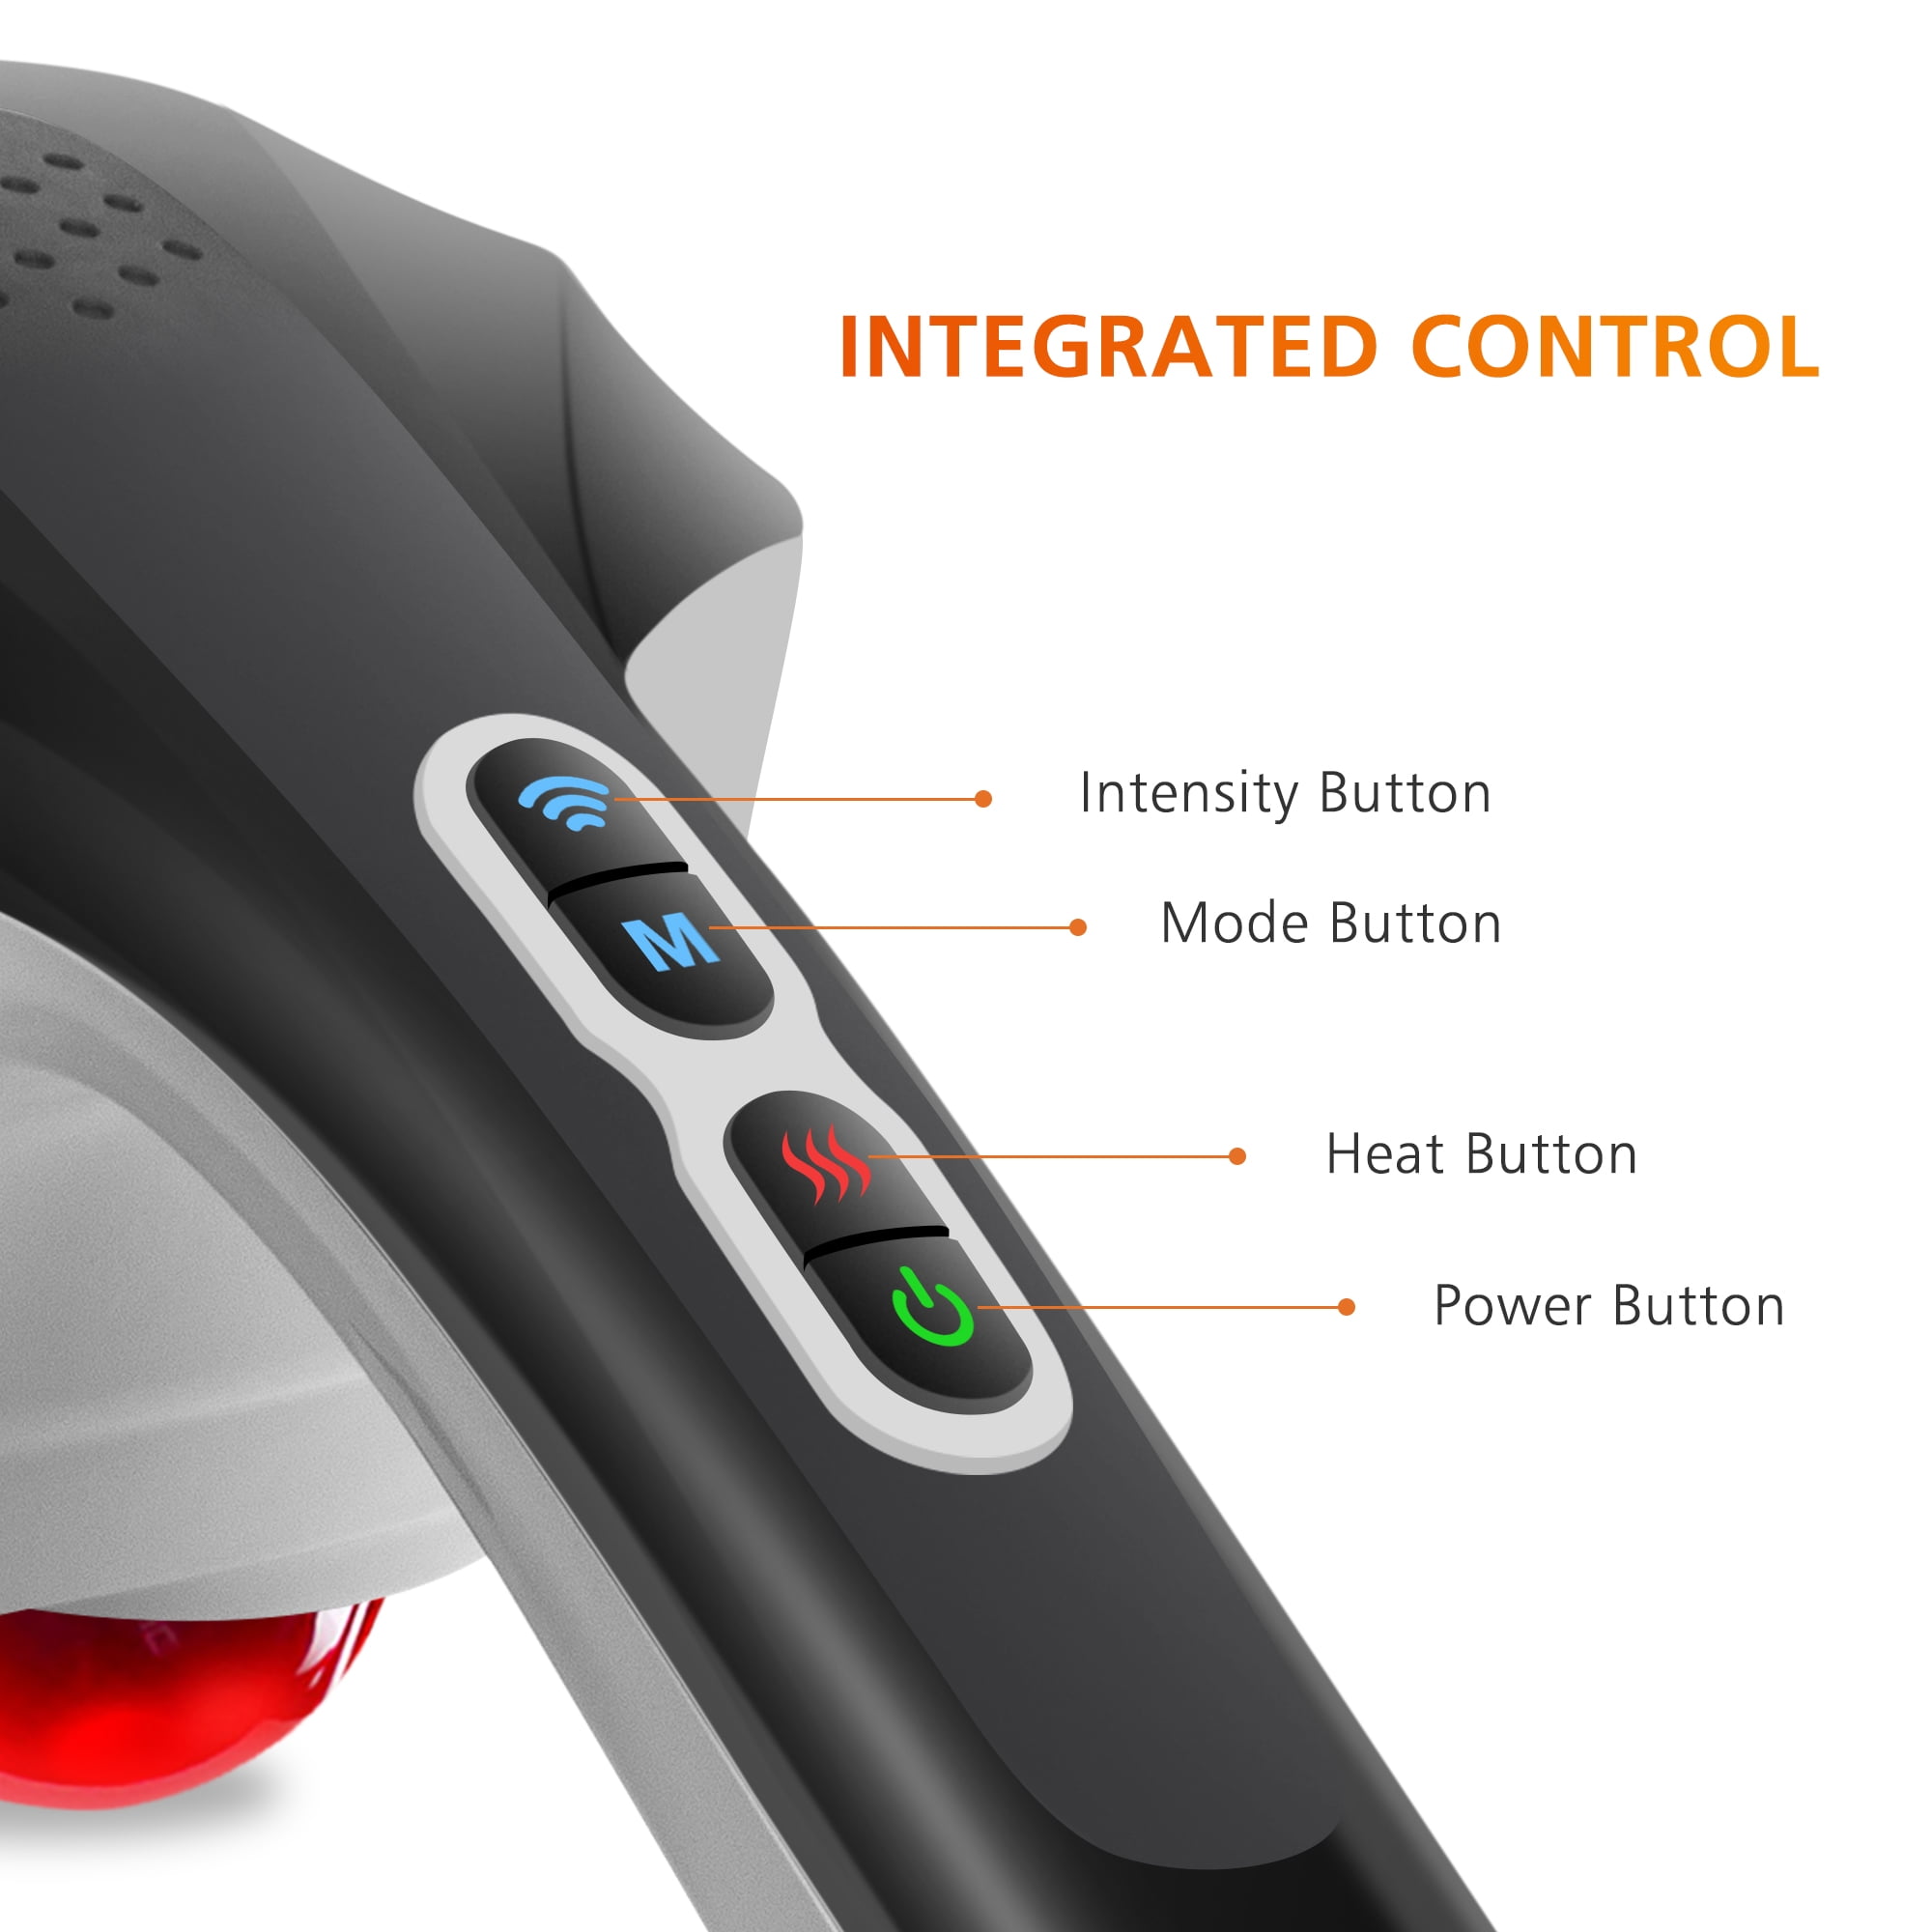 Snailax Cordless Handheld Back Massager with Heat,Deep Tissue Percussion  Massager, 3 Sets of Dual Pi…See more Snailax Cordless Handheld Back  Massager